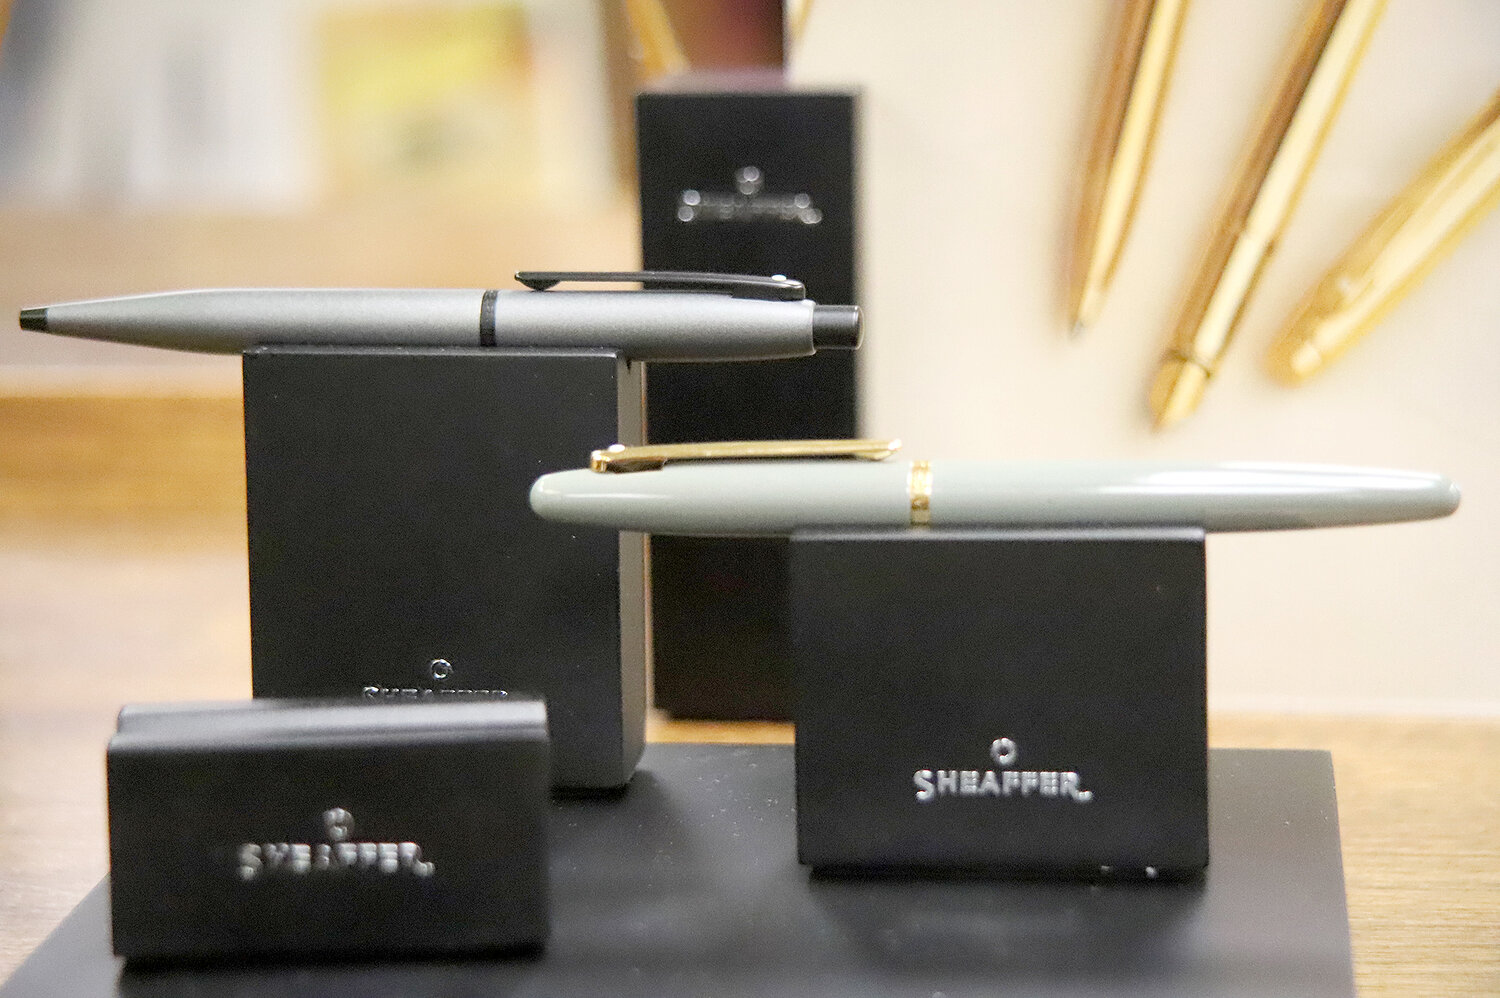 Some of the new finishes for Sheaffer Pens were unveiled at the Sheaffer Pen museum in Fort Madison Friday in a meet and greet with the pen brand's new owner Nikhil Ranjan.